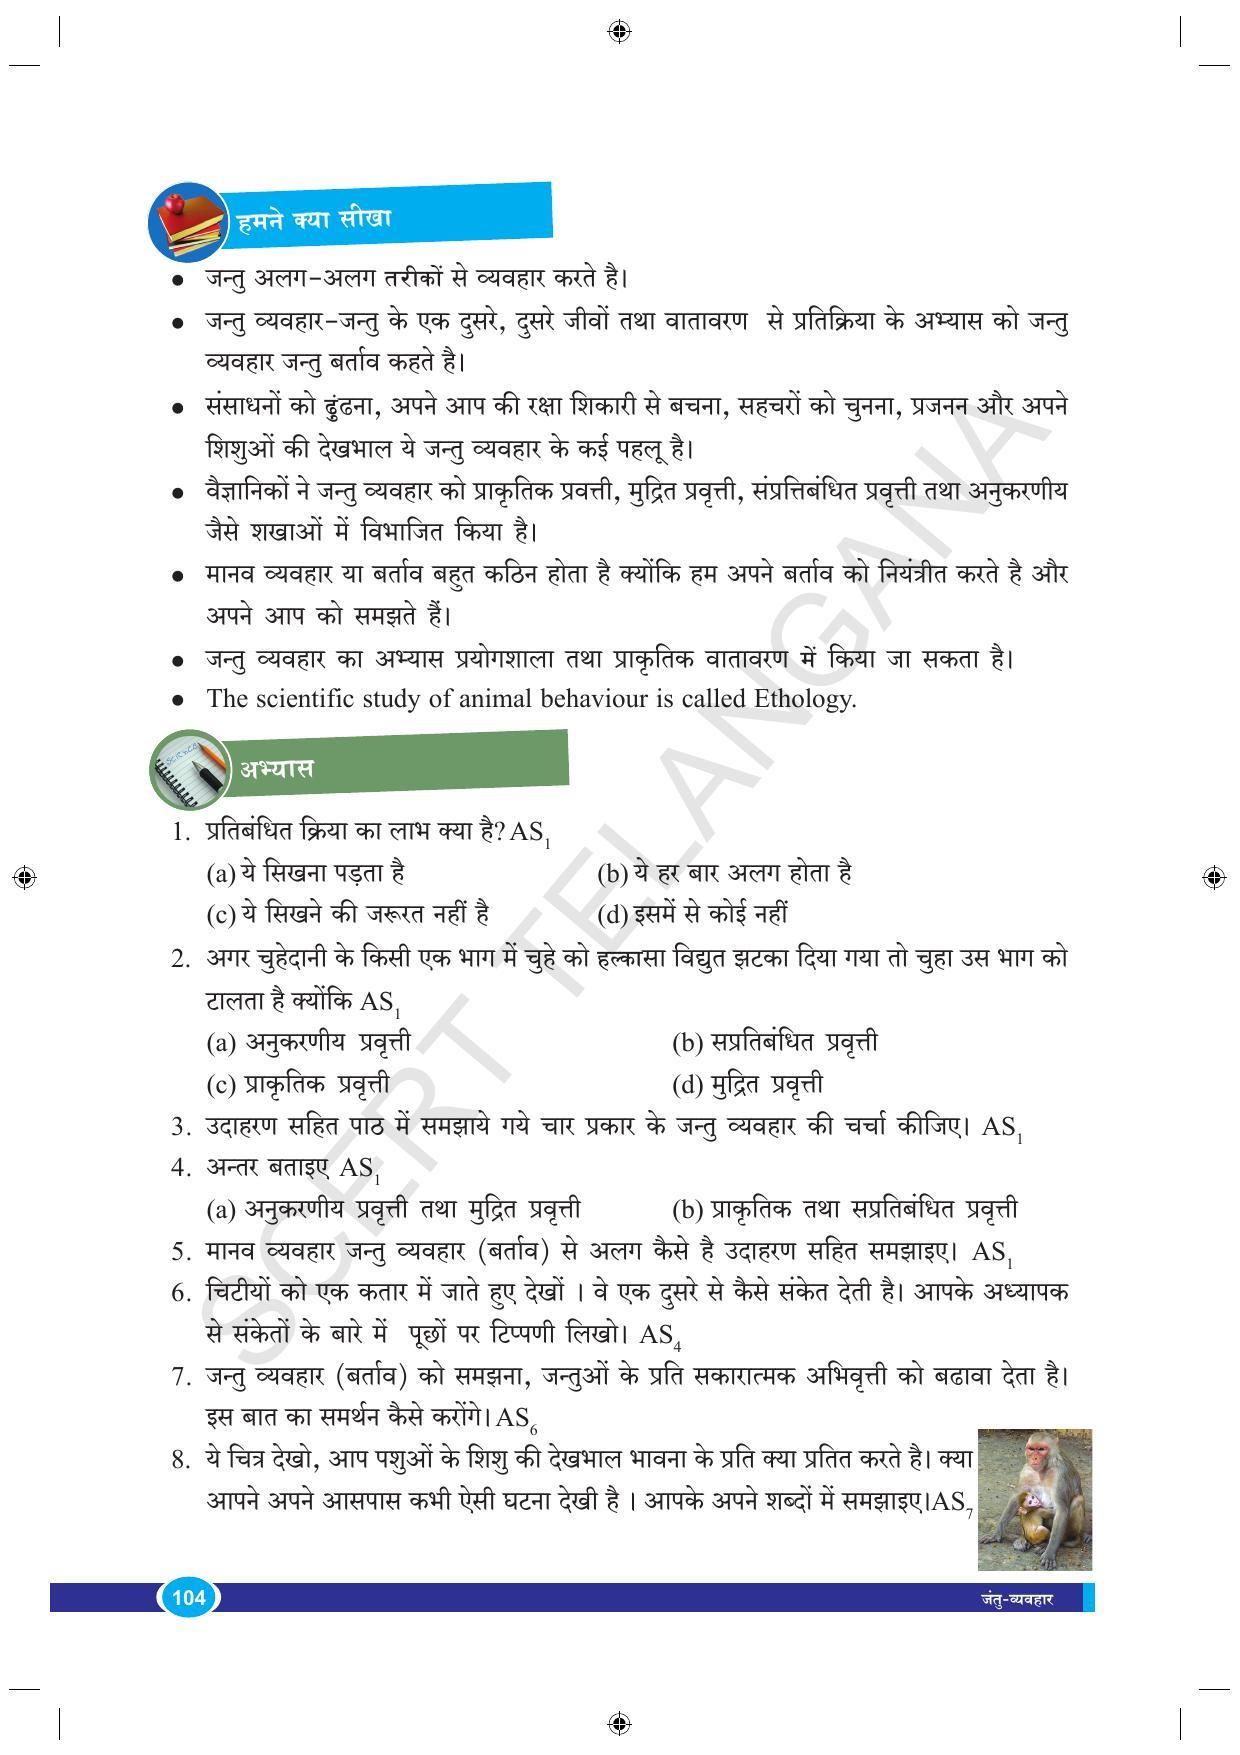 TS SCERT Class 9 Biological Science (Hindi Medium) Text Book - Page 116